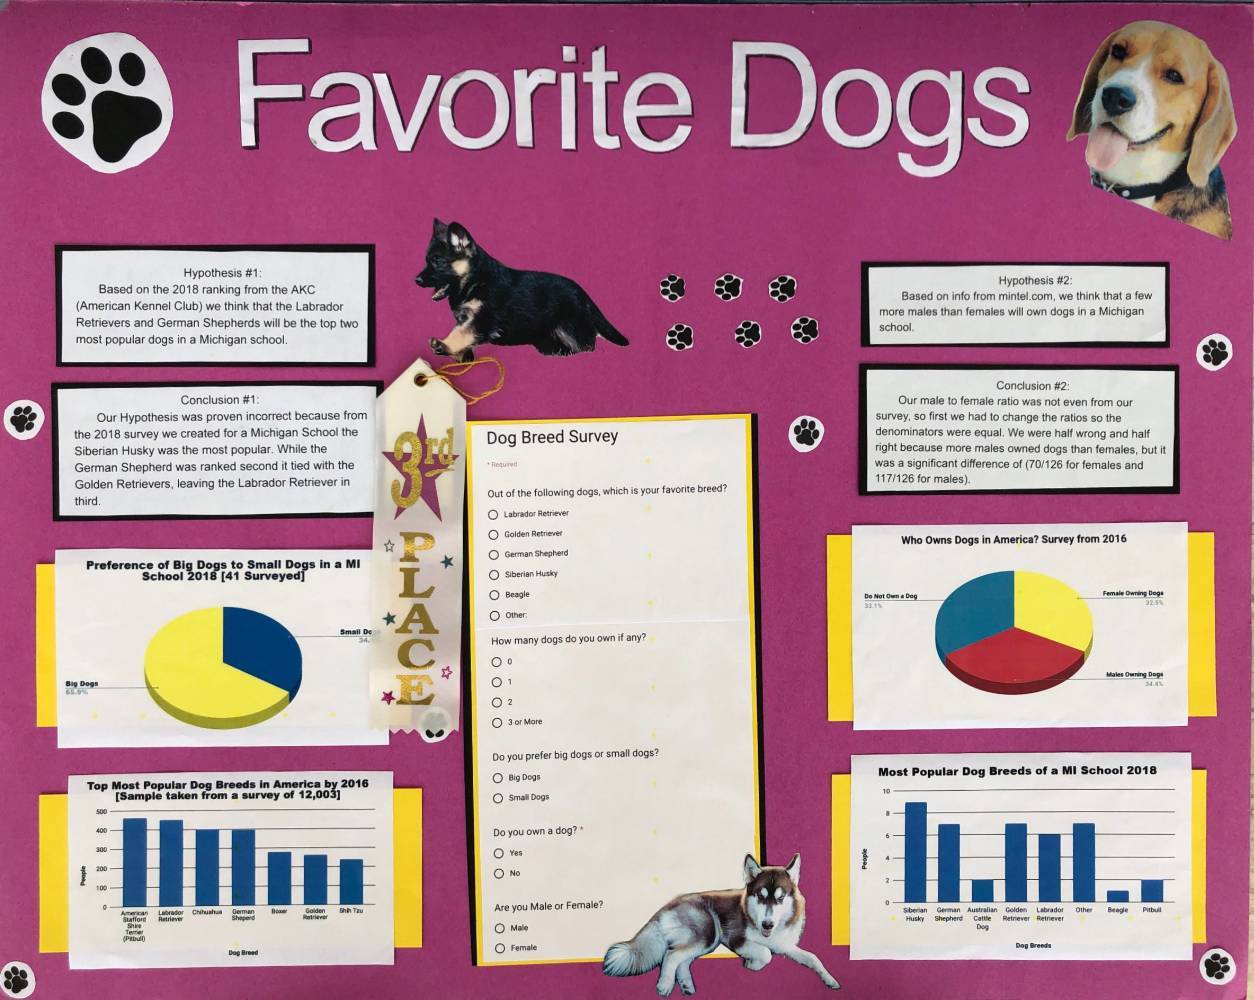 Example poster: "Favorite Dogs"